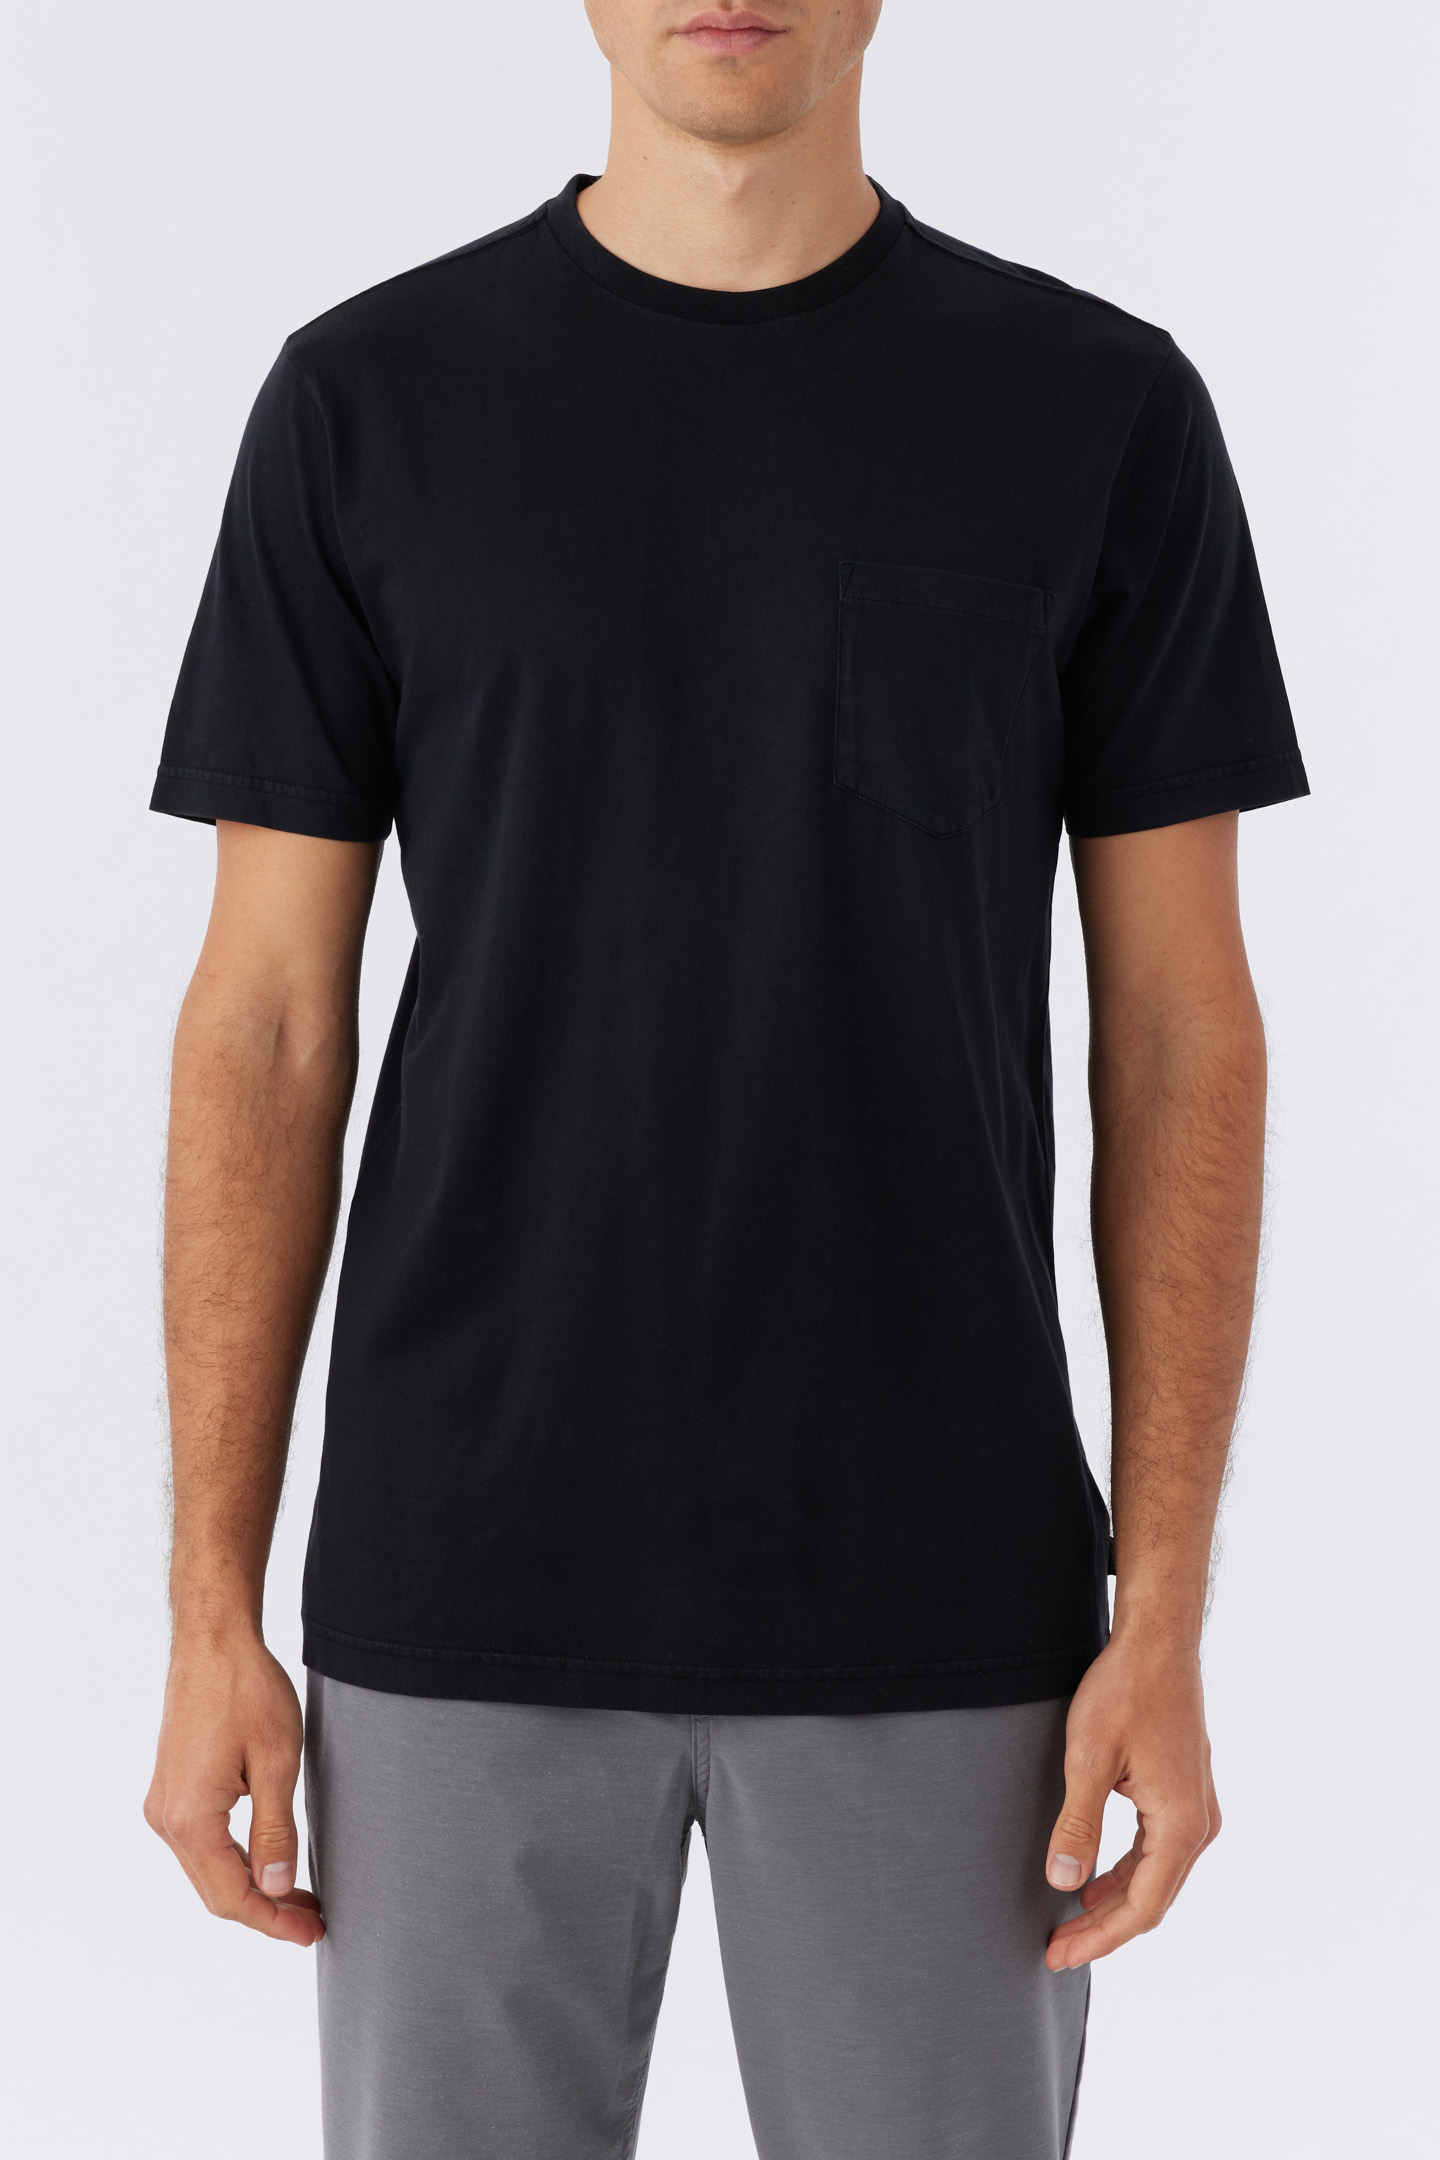 East Cliff Hang Out Tee - Black | O\'Neill